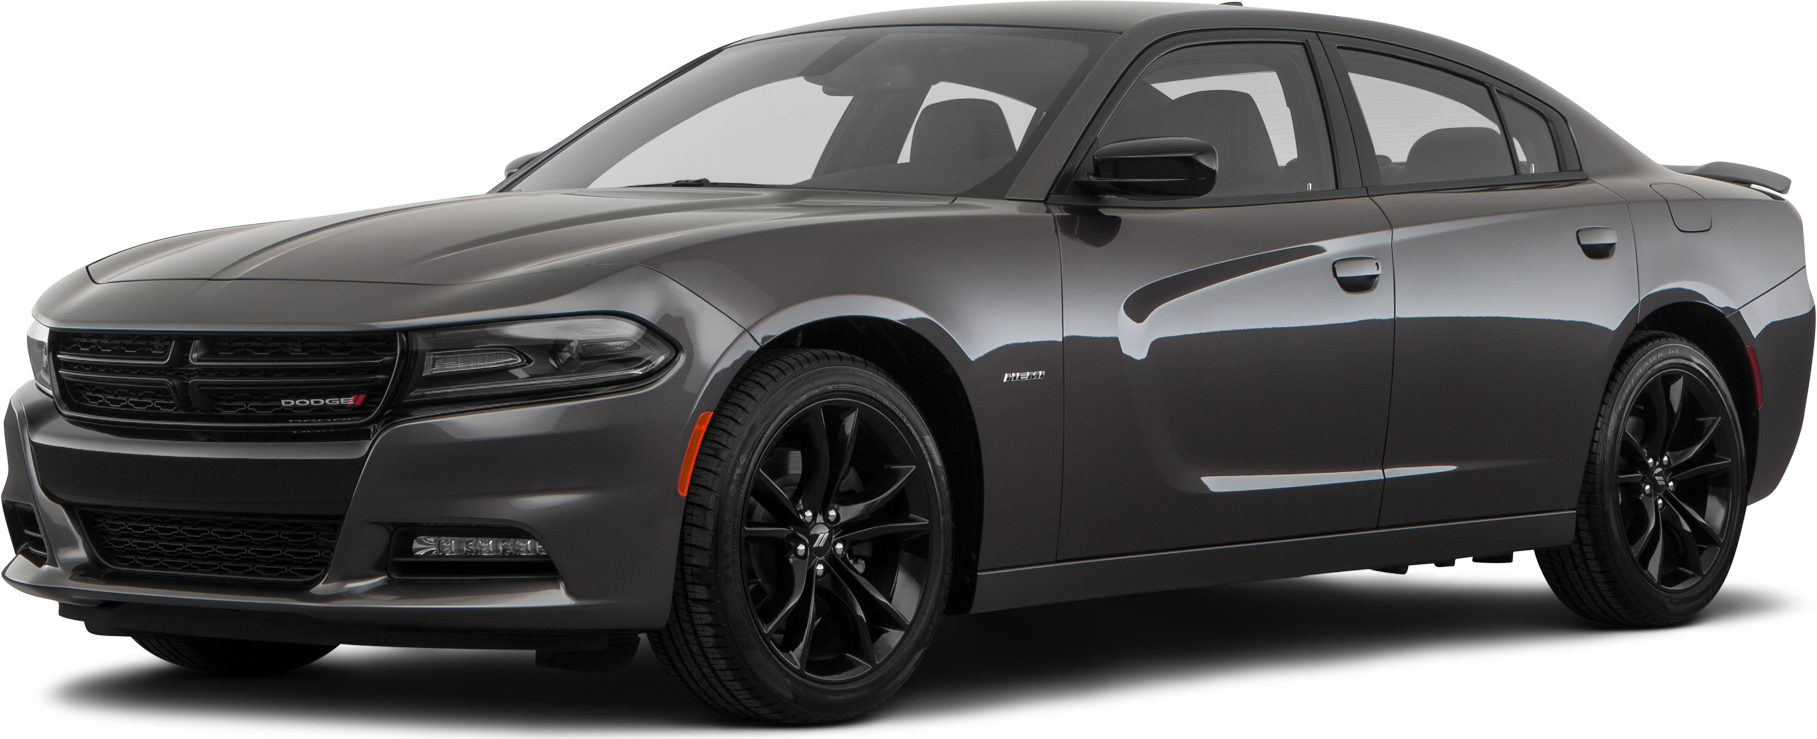 2015 Dodge Charger Price, Value, Ratings & Reviews